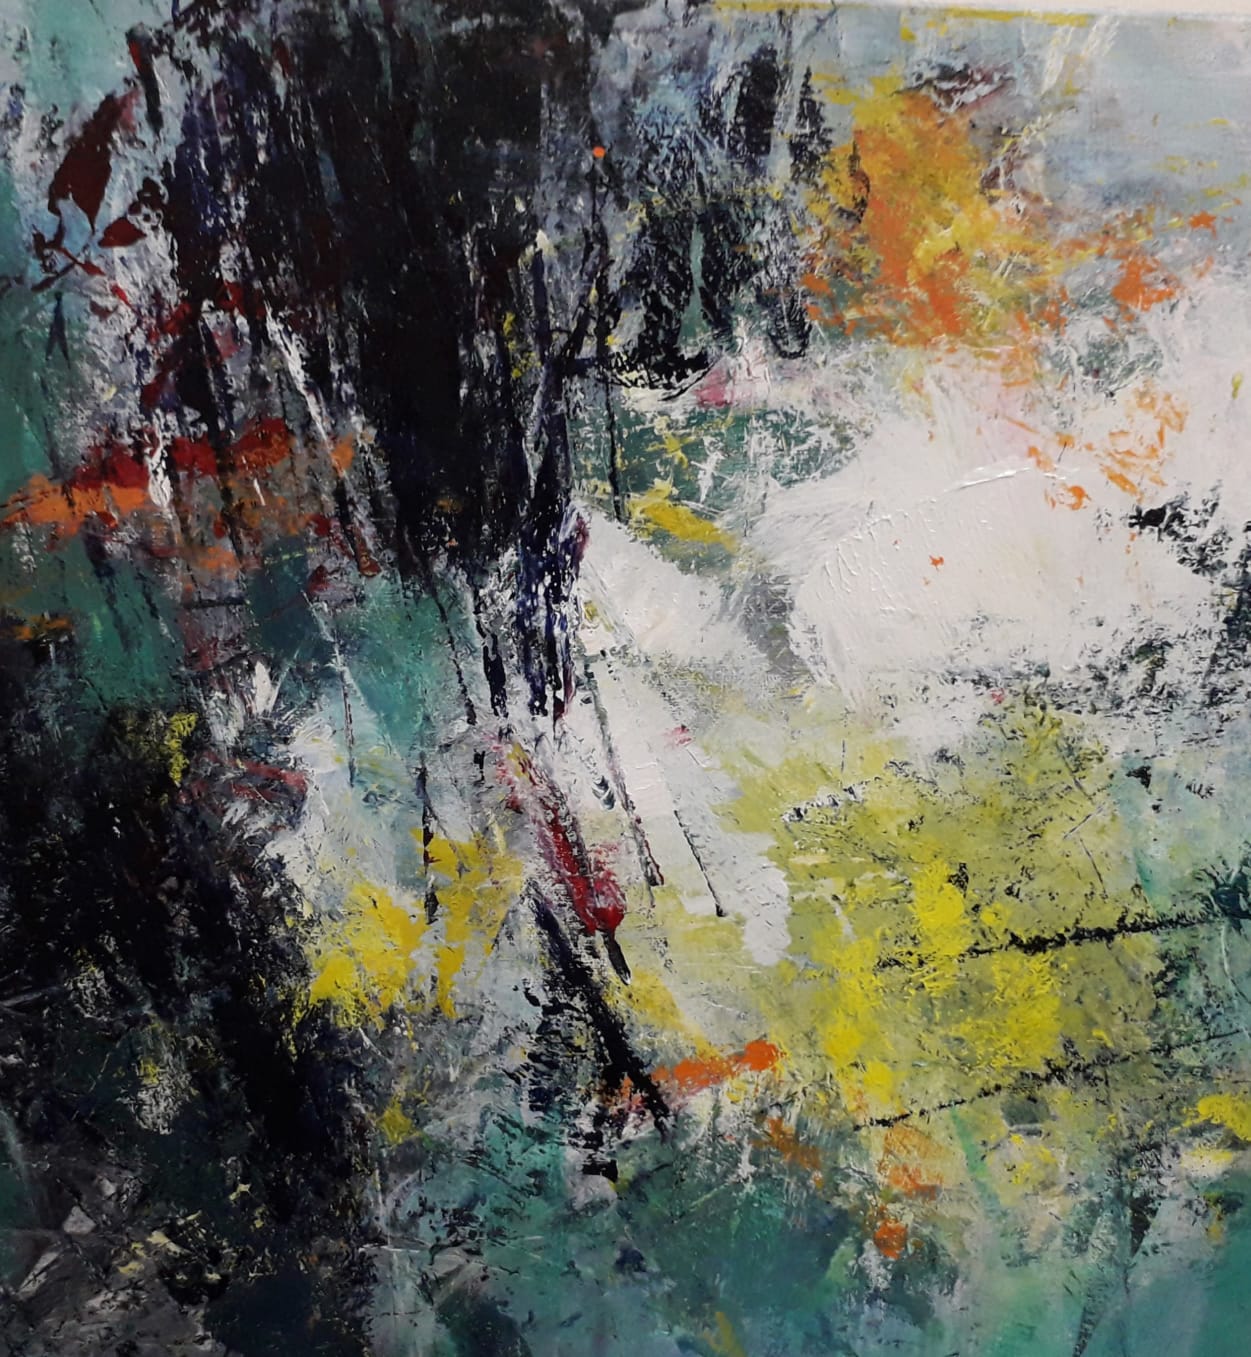 Abstract landscape by Anita Roye. The bottom layer in acrylic paint is pale blue. On the left side are two rough areas of very dark colours, highlighted on the right by blurry patches of yellow and white.